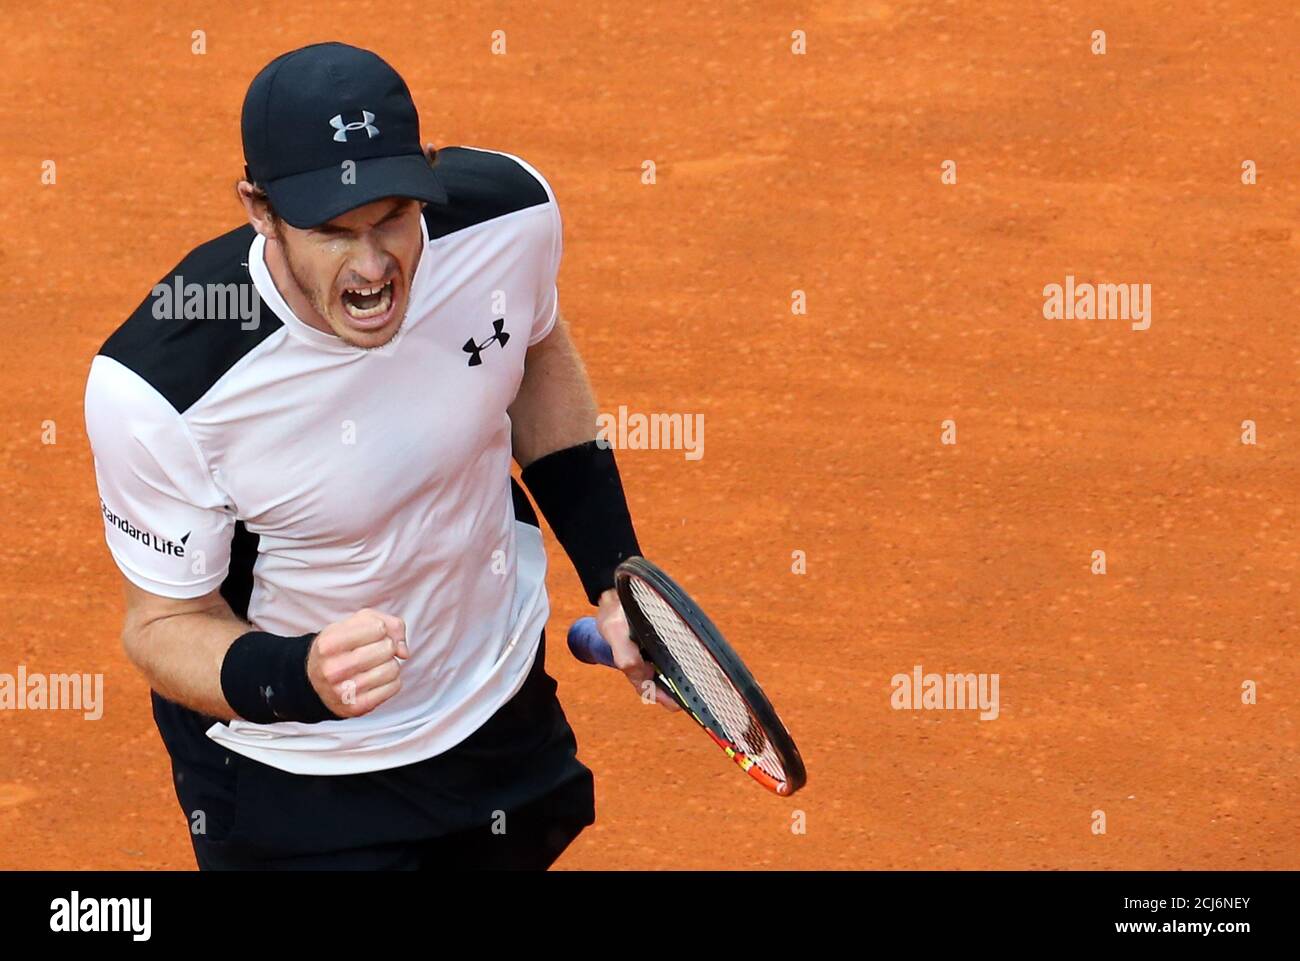 Tennis - Italy Open Men's Singles Final match - Novak Djokovic of Serbia v Andy Murray of Britain - Rome, Italy - 15/5/16 Murray reacts.  REUTERS/Alessandro Bianchi Stock Photo